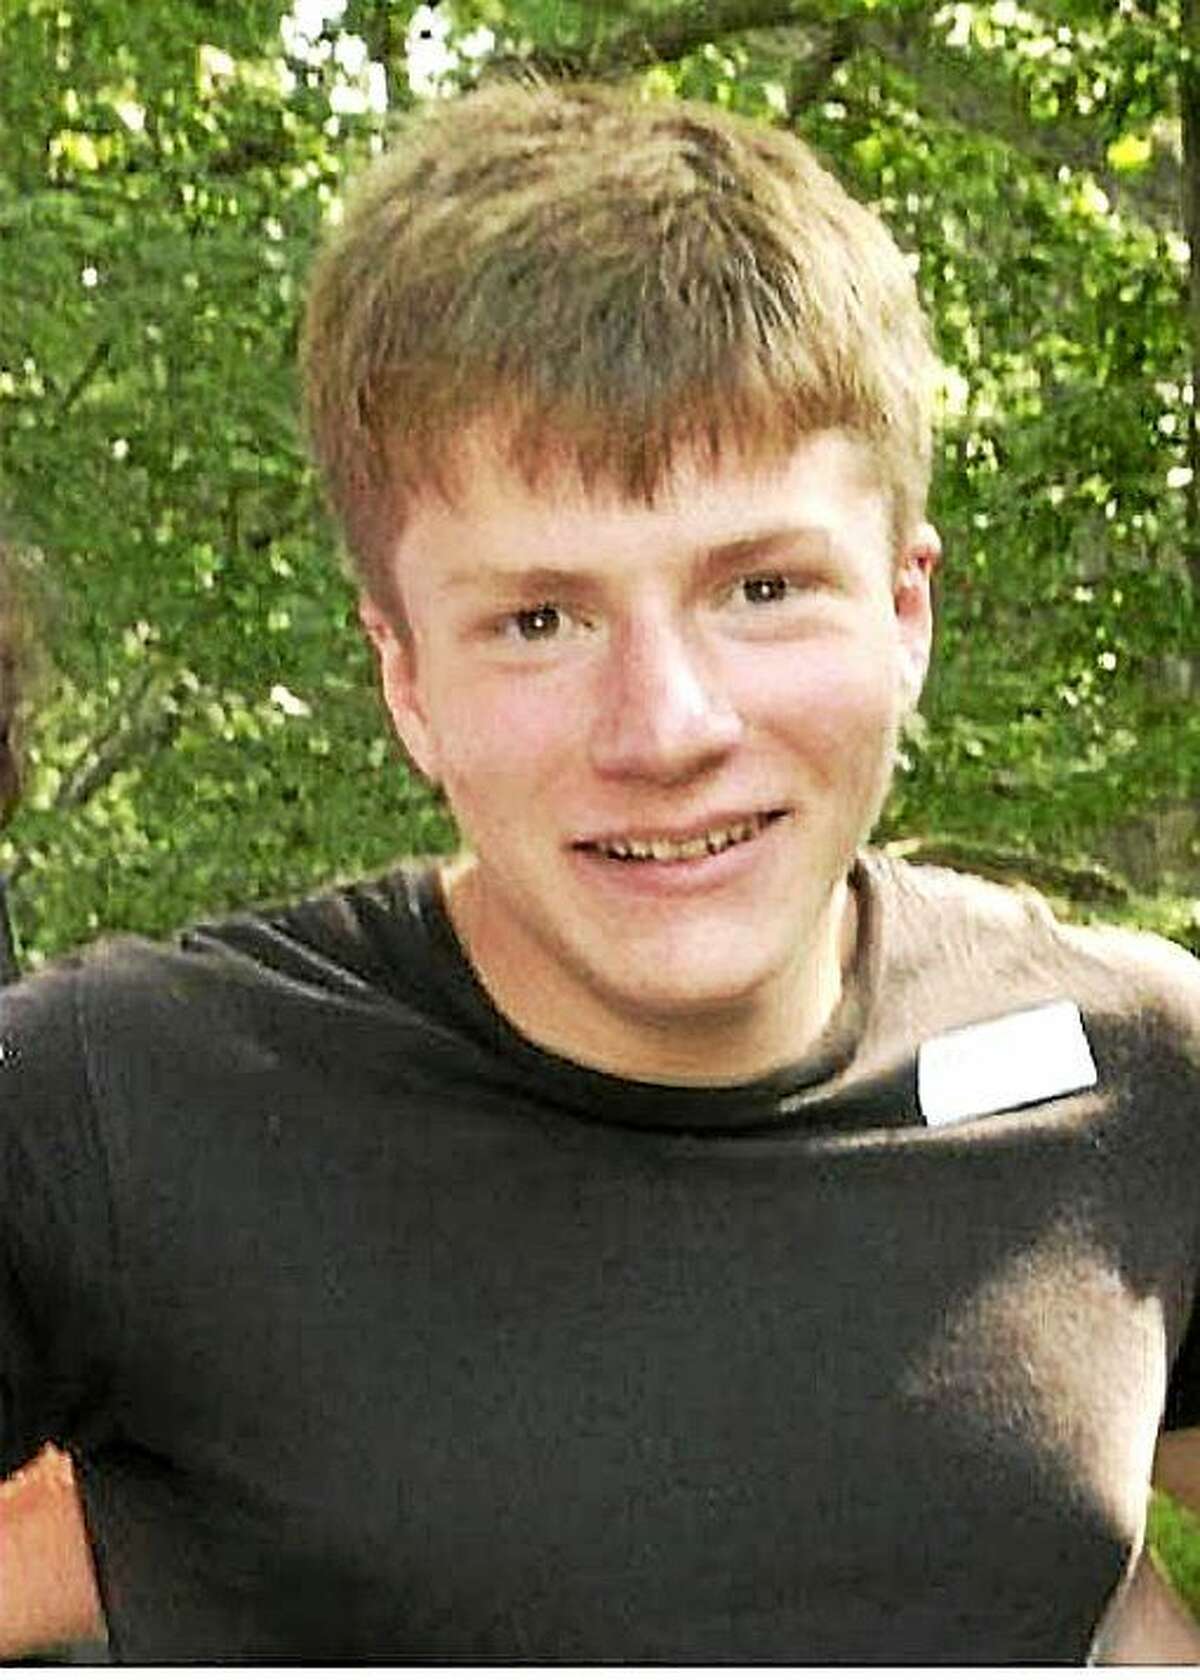 File photo Sam Foley, 17, of Clinton has been missing from since August.